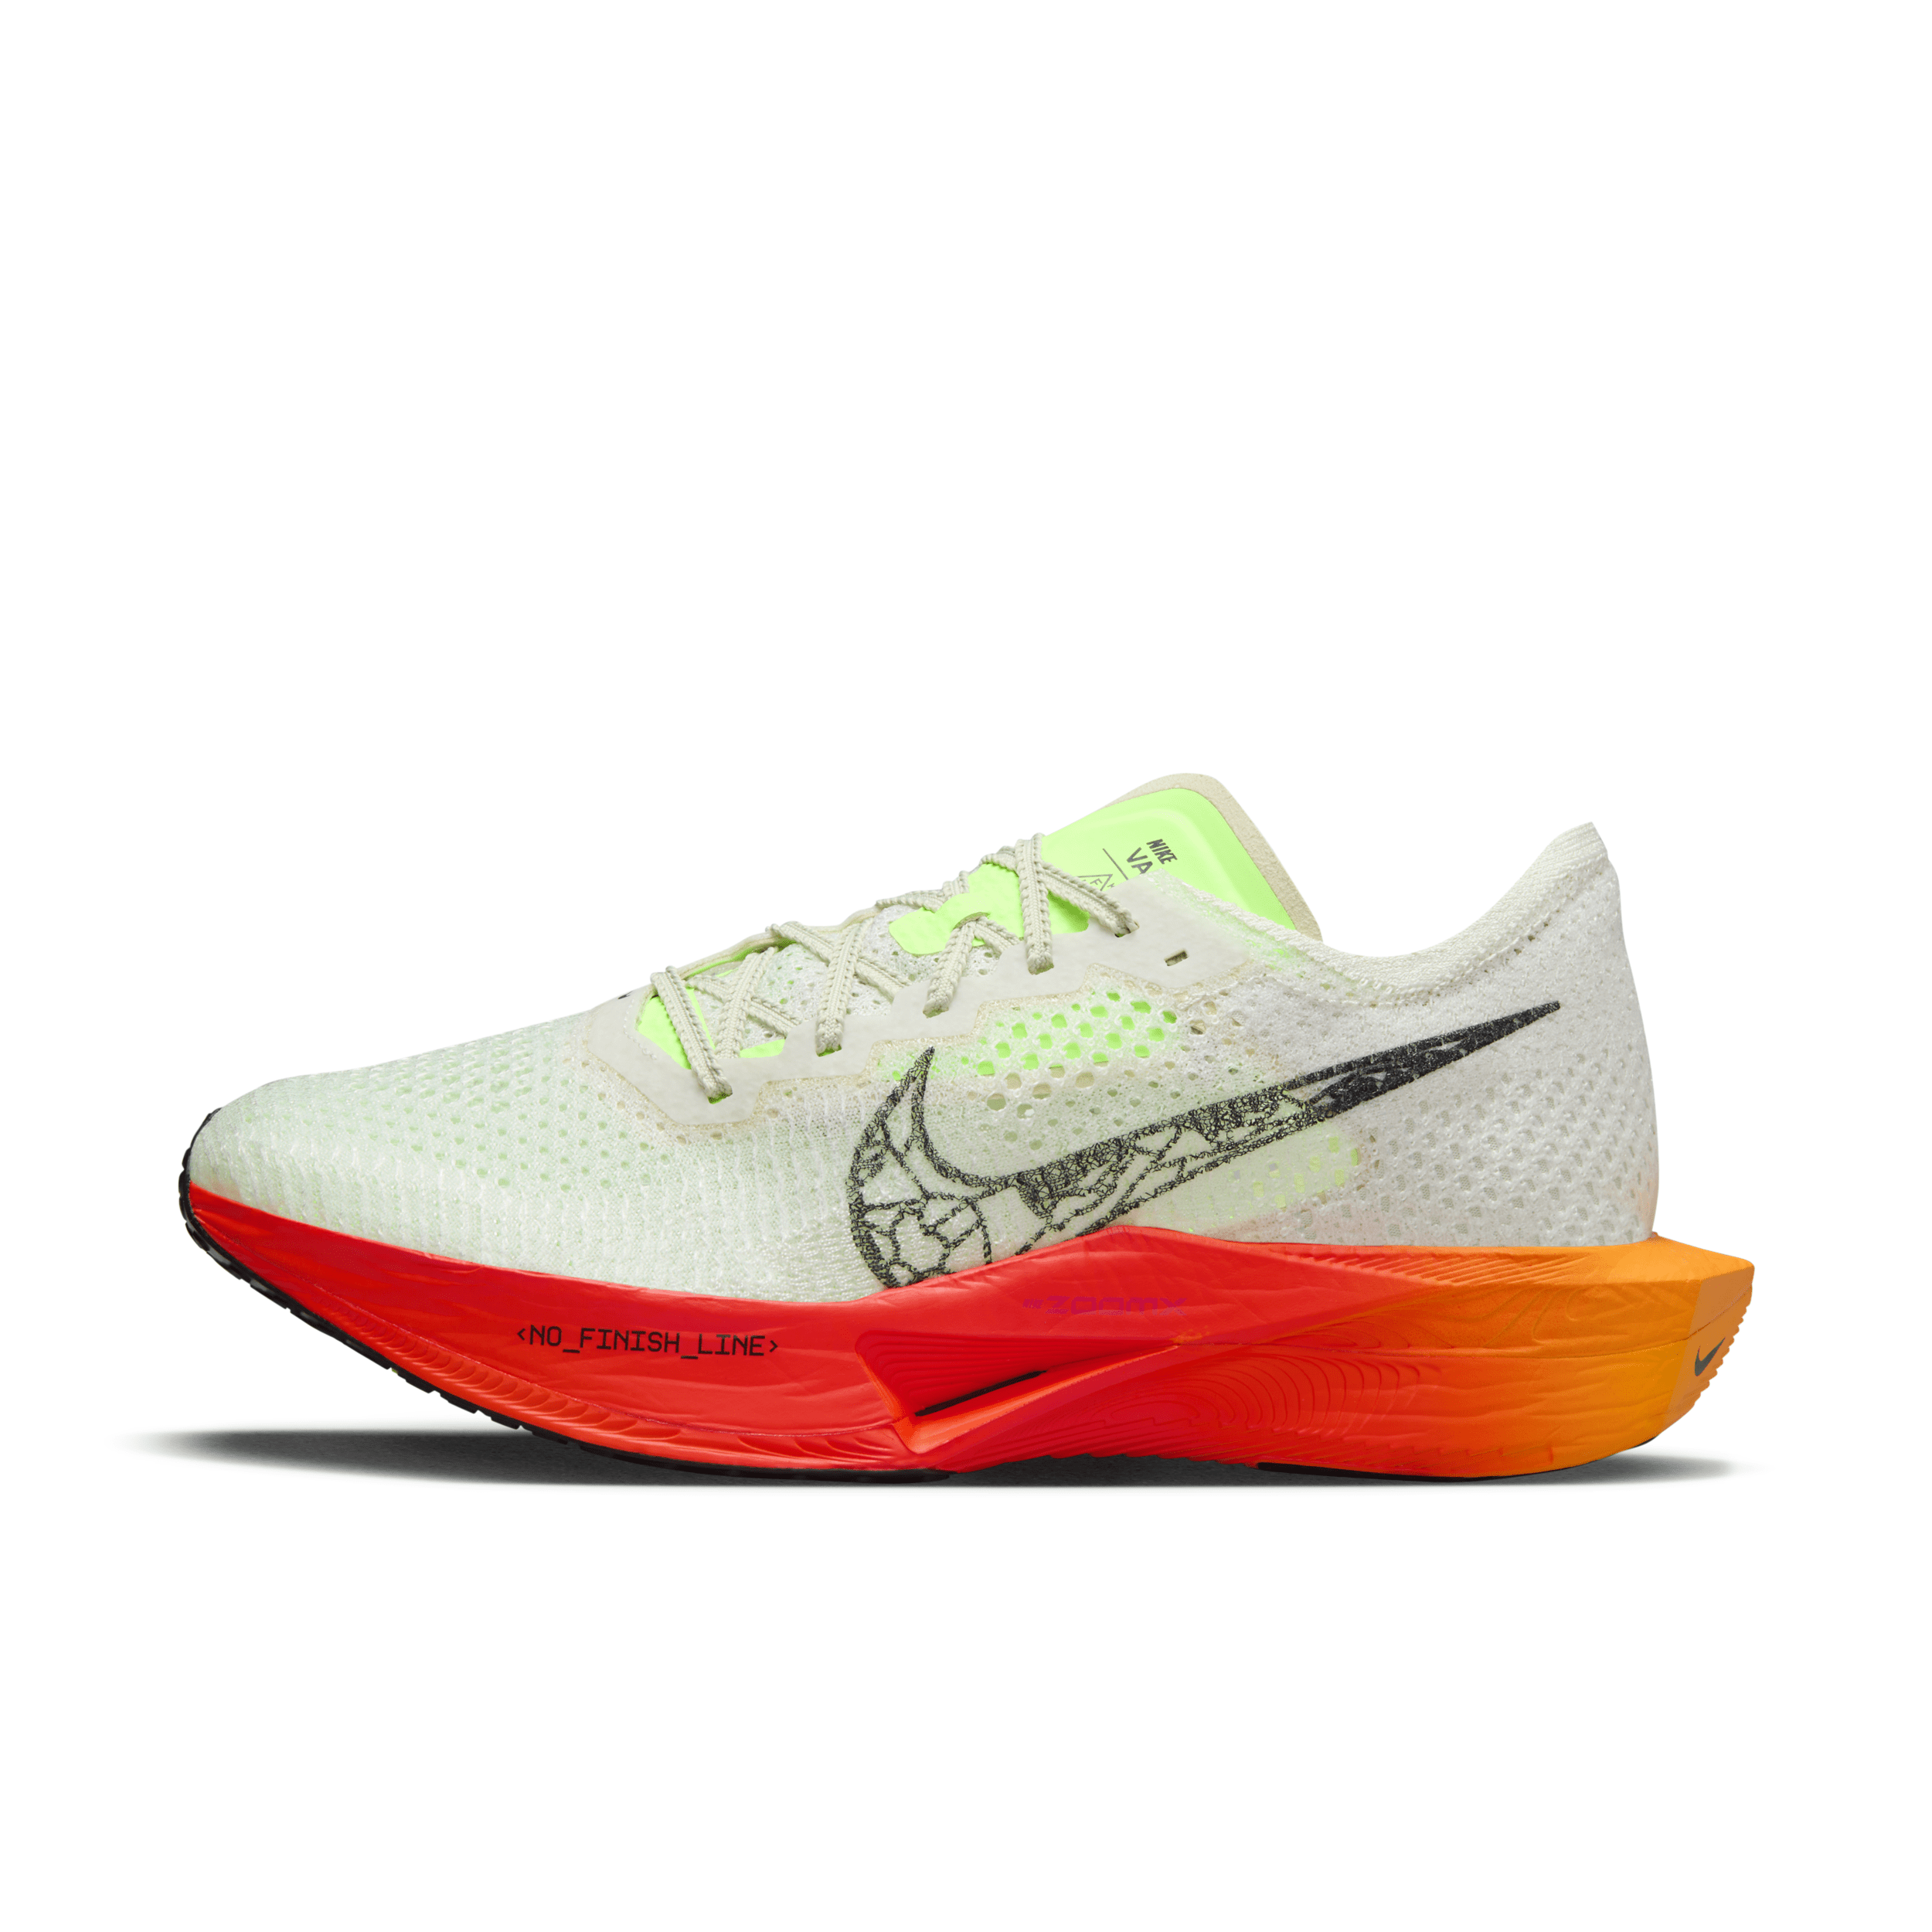 Nike Zoomx Vaporfly Next% 3 "no Finish Line" Sneakers In Green